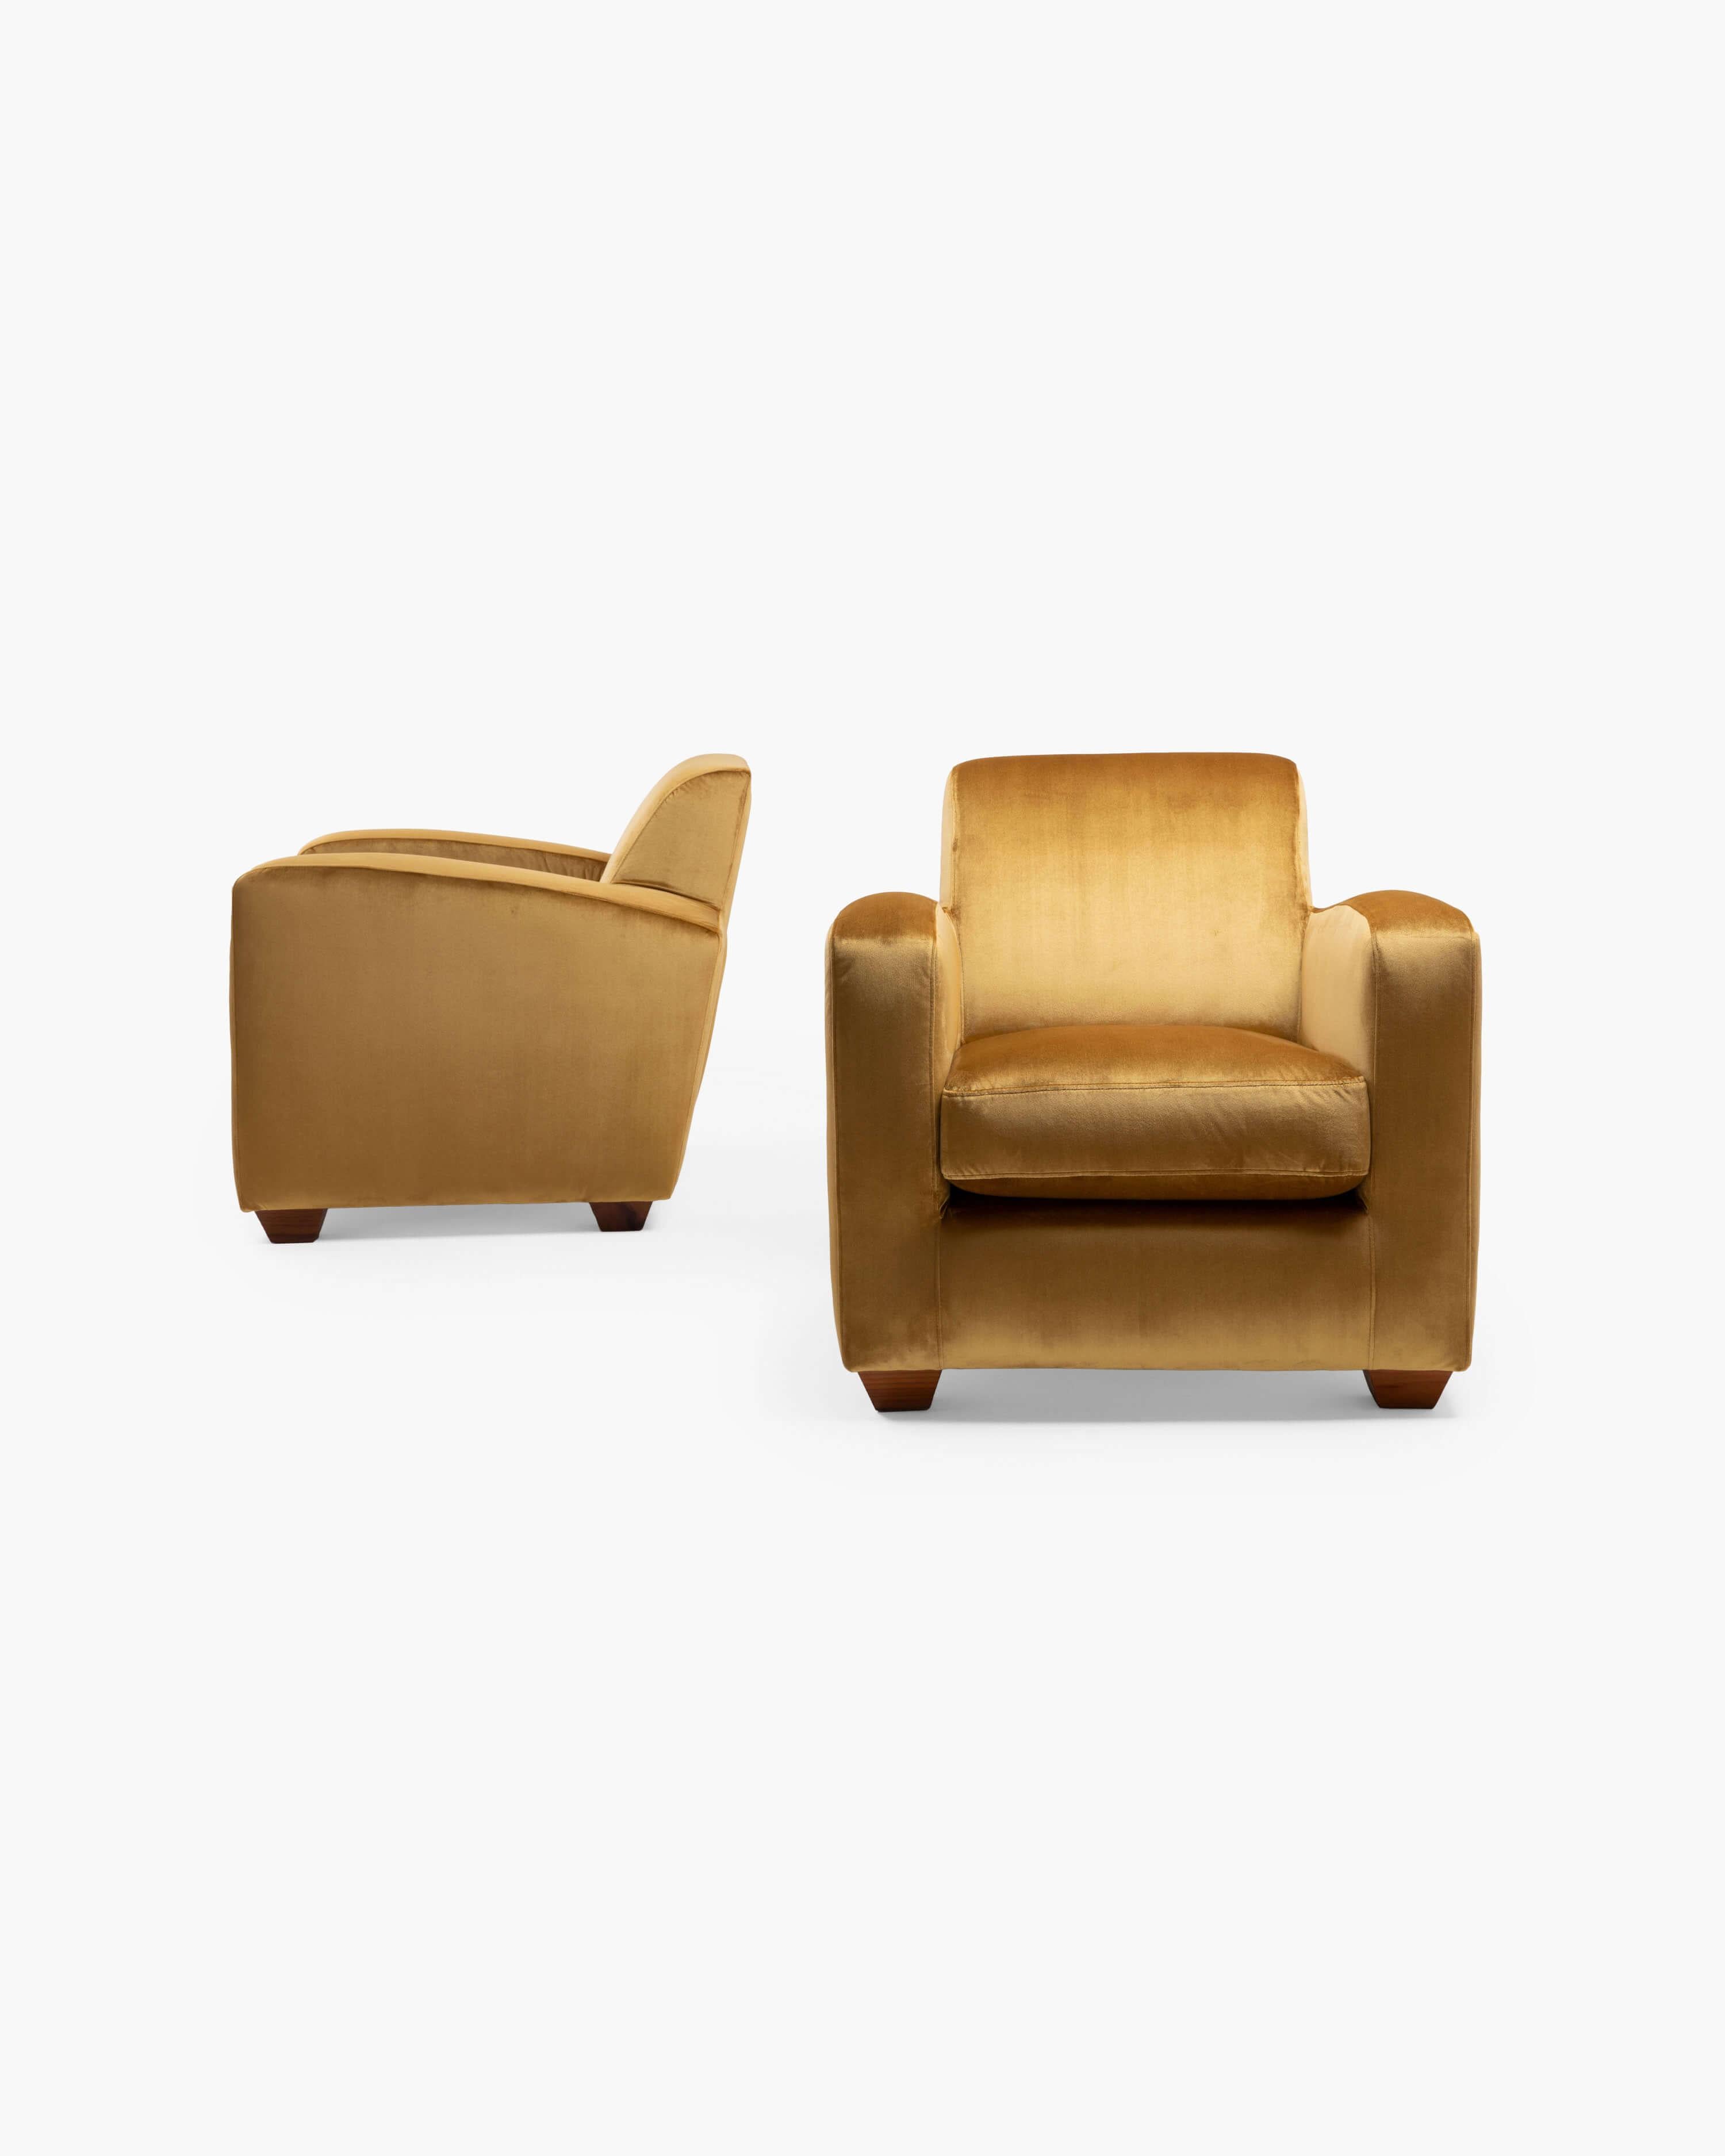 Immerse yourself in the epitome of French design with this exceptional pair of French Art Deco club chairs, originating from circa 1930. Crafted in the style of the renowned Jacques Adnet, these chairs have undergone a thoughtful reupholstery